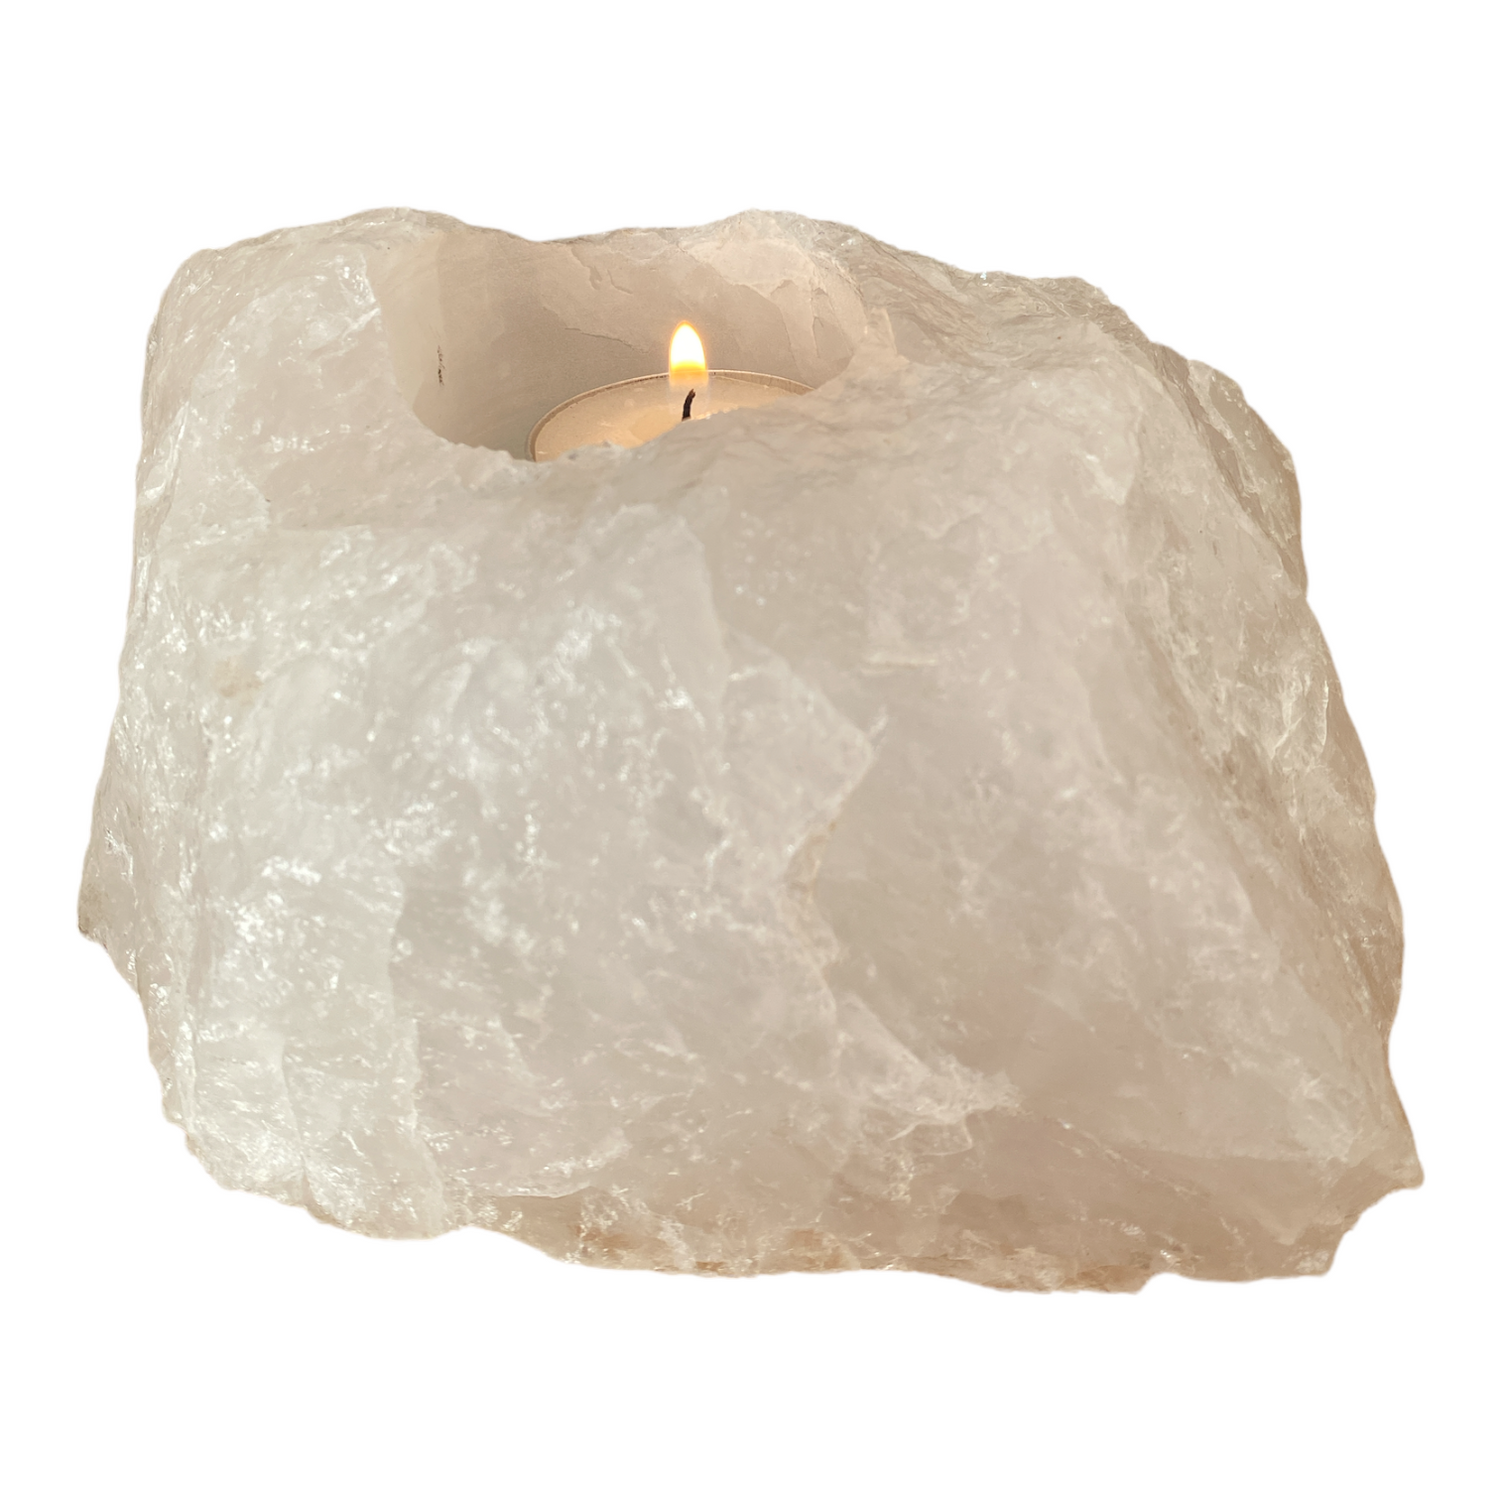 White Quartz Candle Holder - EARLY BIRD SPECIAL April 2022 - Crystal Geological